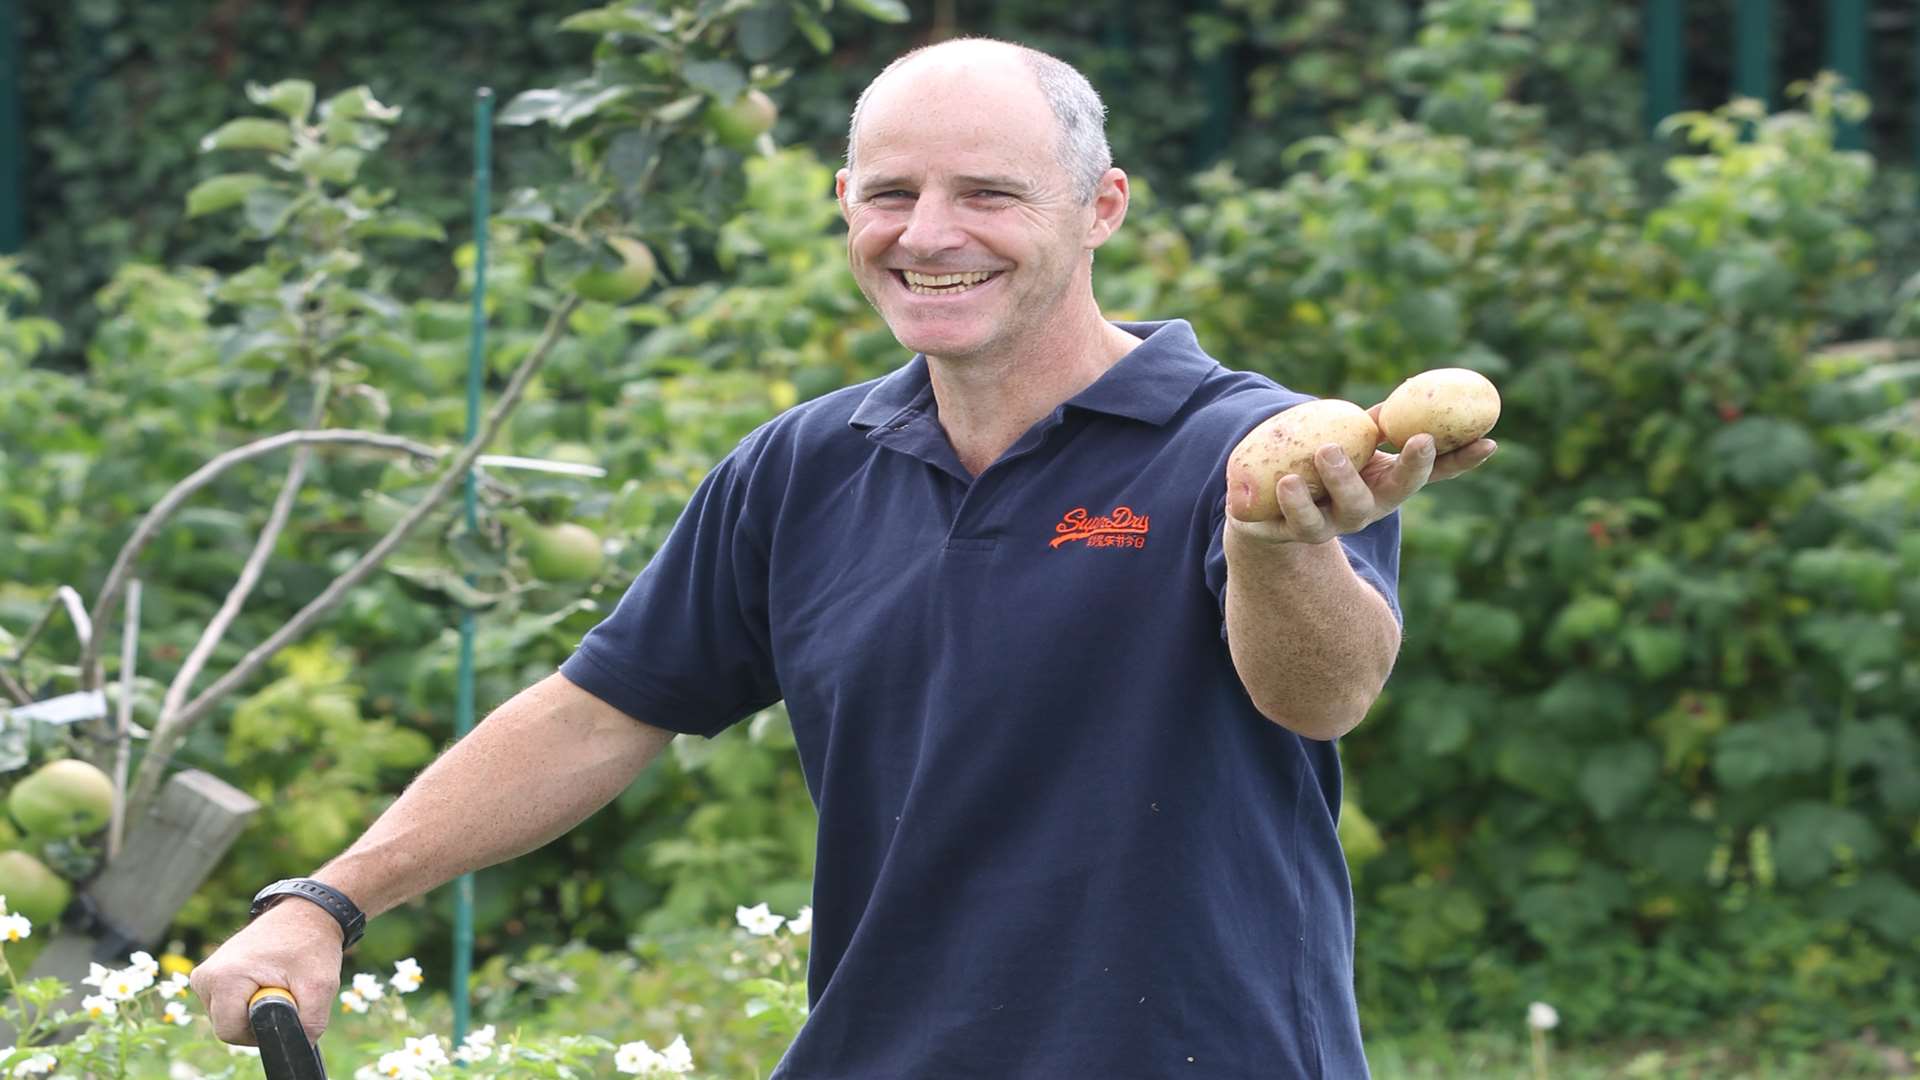 Ian Robson holds up Cara potatoes as a tenant of The Swanscombe and Greenhithe Allotments and Gardens Associations